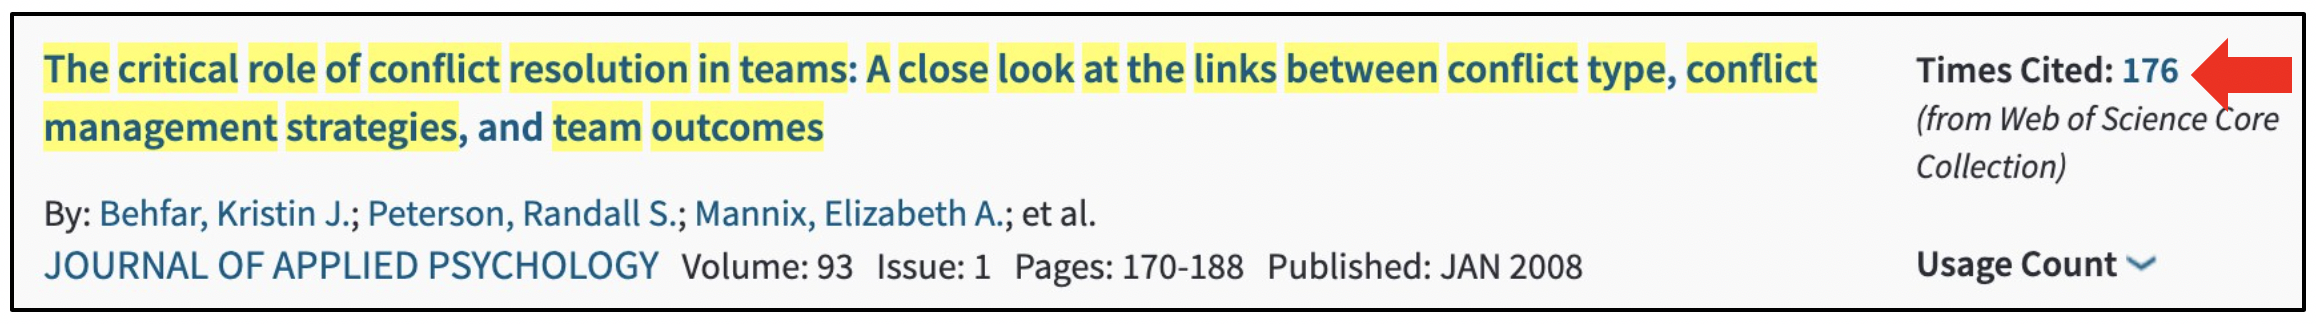 Times cited link on Web of Science results page